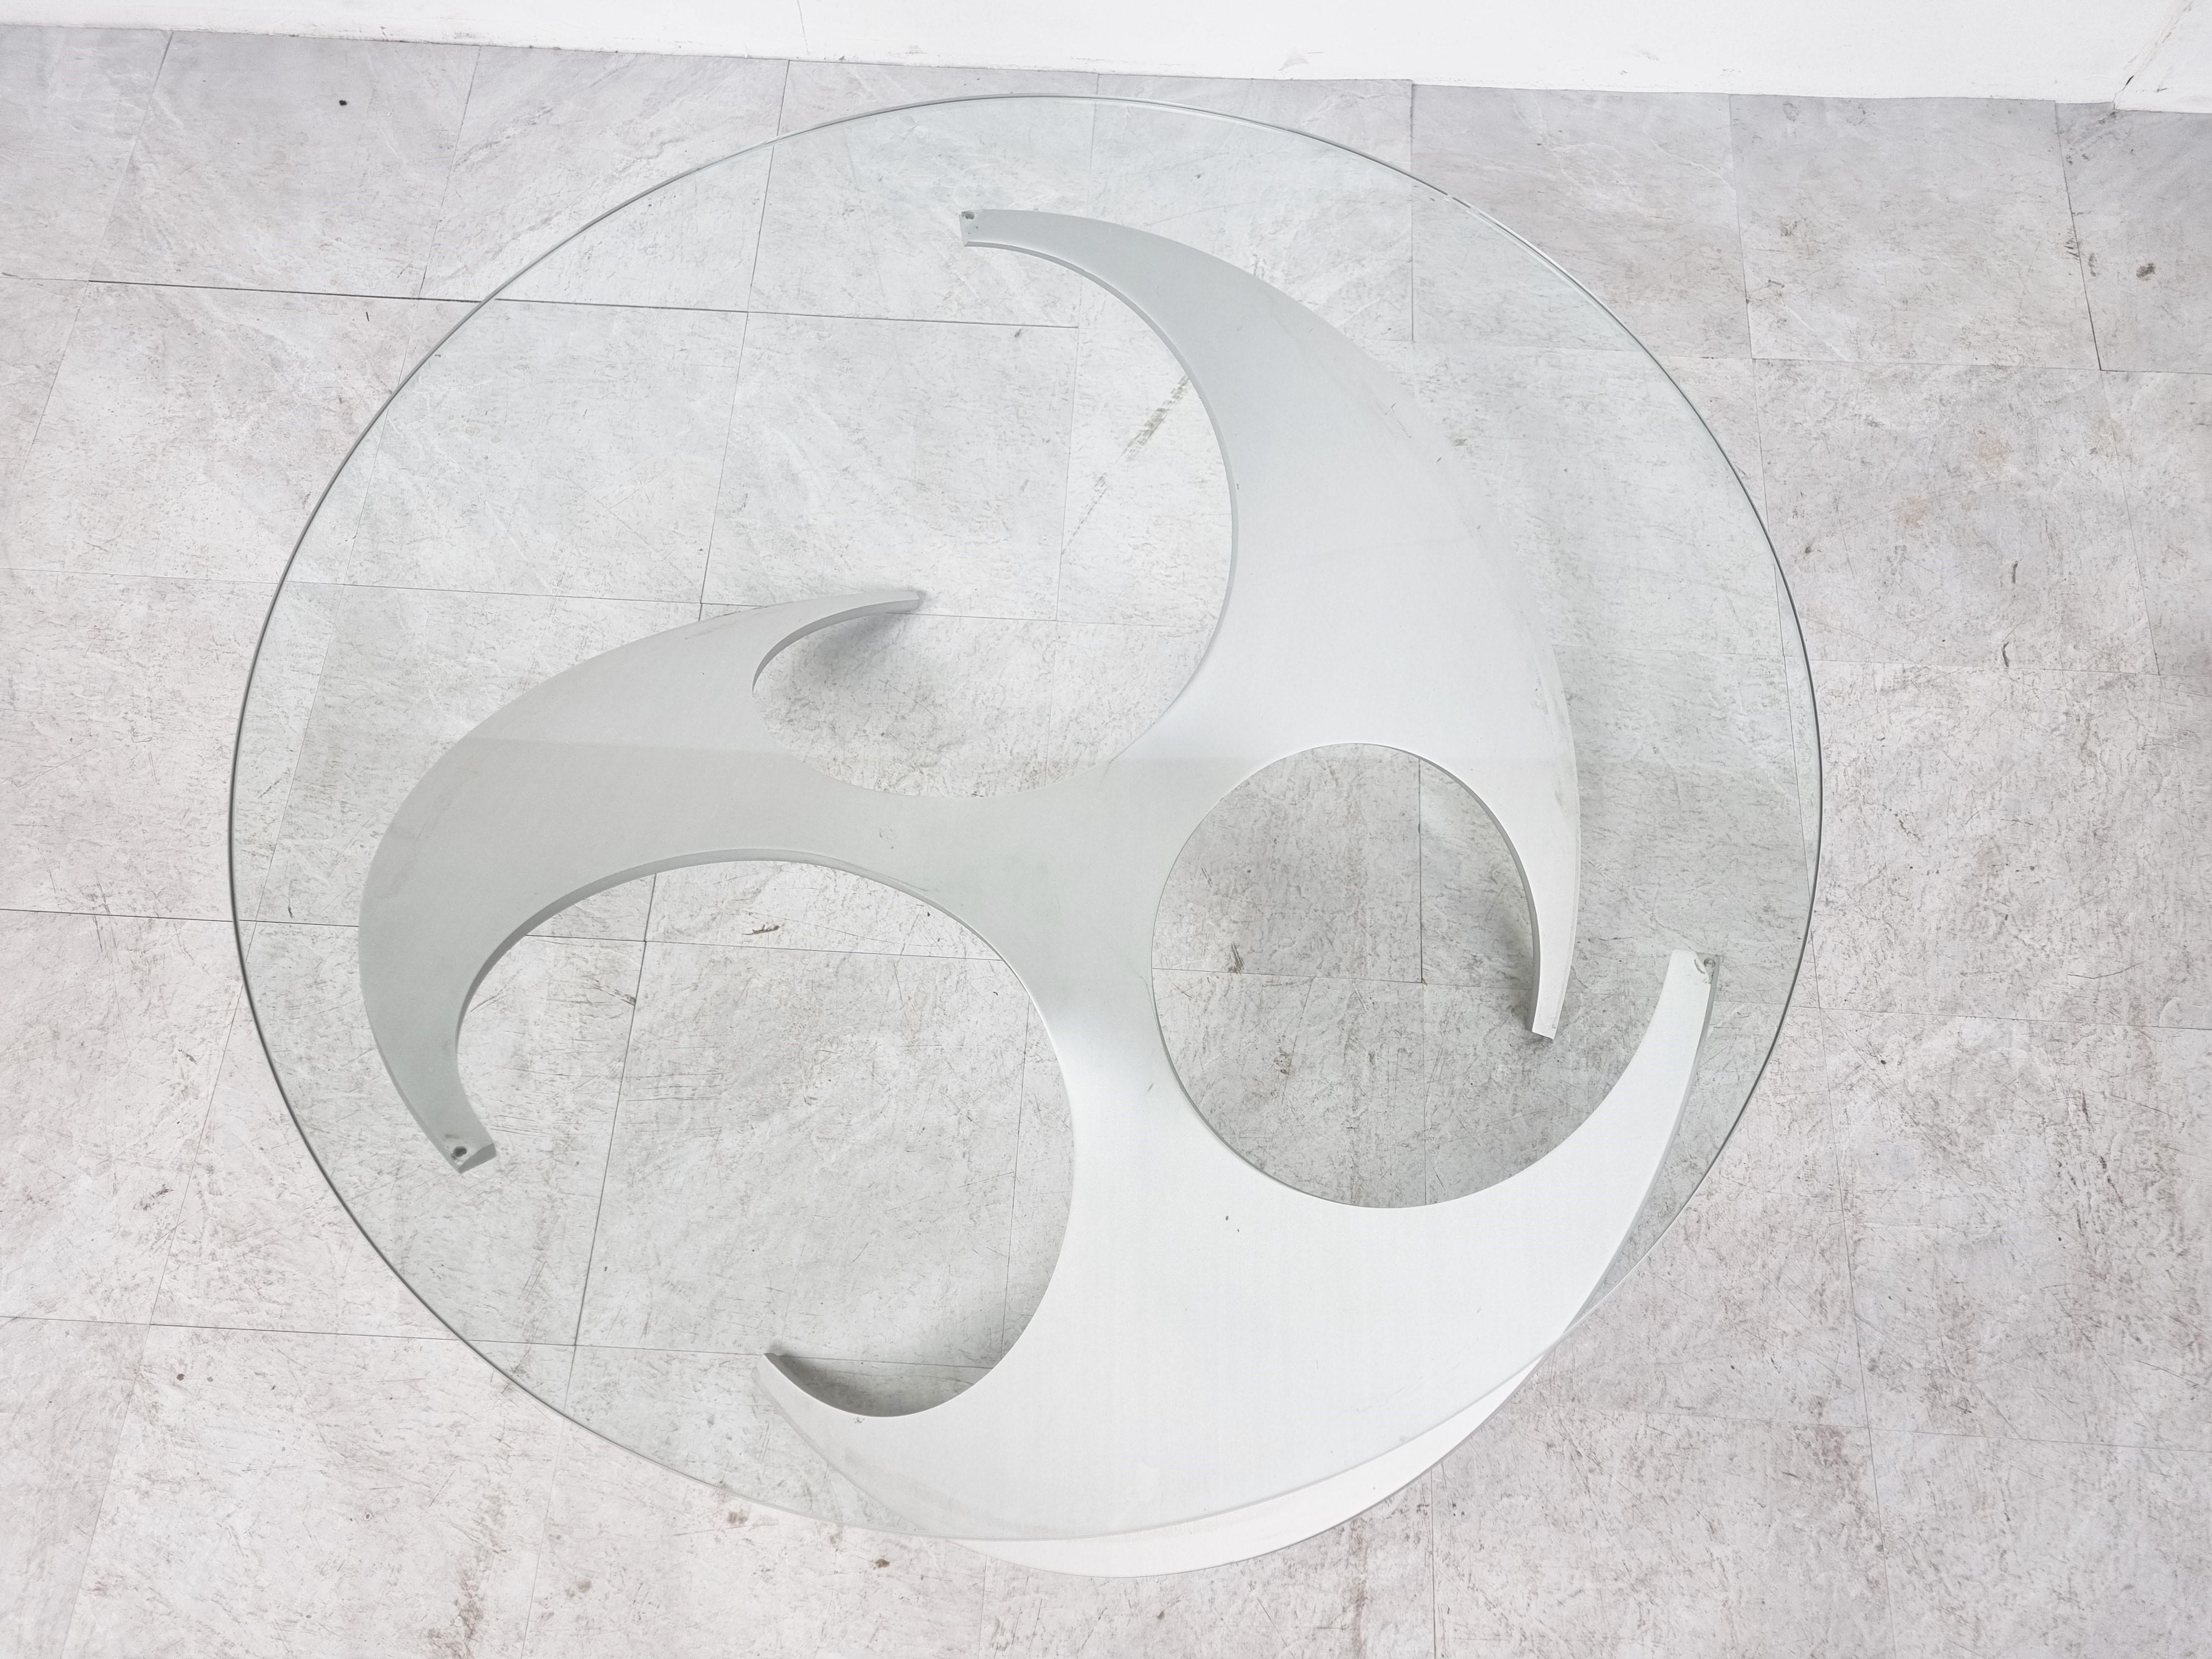 Mid century 'propellor' coffee tables by Knut Hesterberg for Ronald Schmitt.

Beautifully crafted brushed aluminum propellor shaped bases.

Good condition with normal age related wear.

The glasses on the images are an example, we offer a new